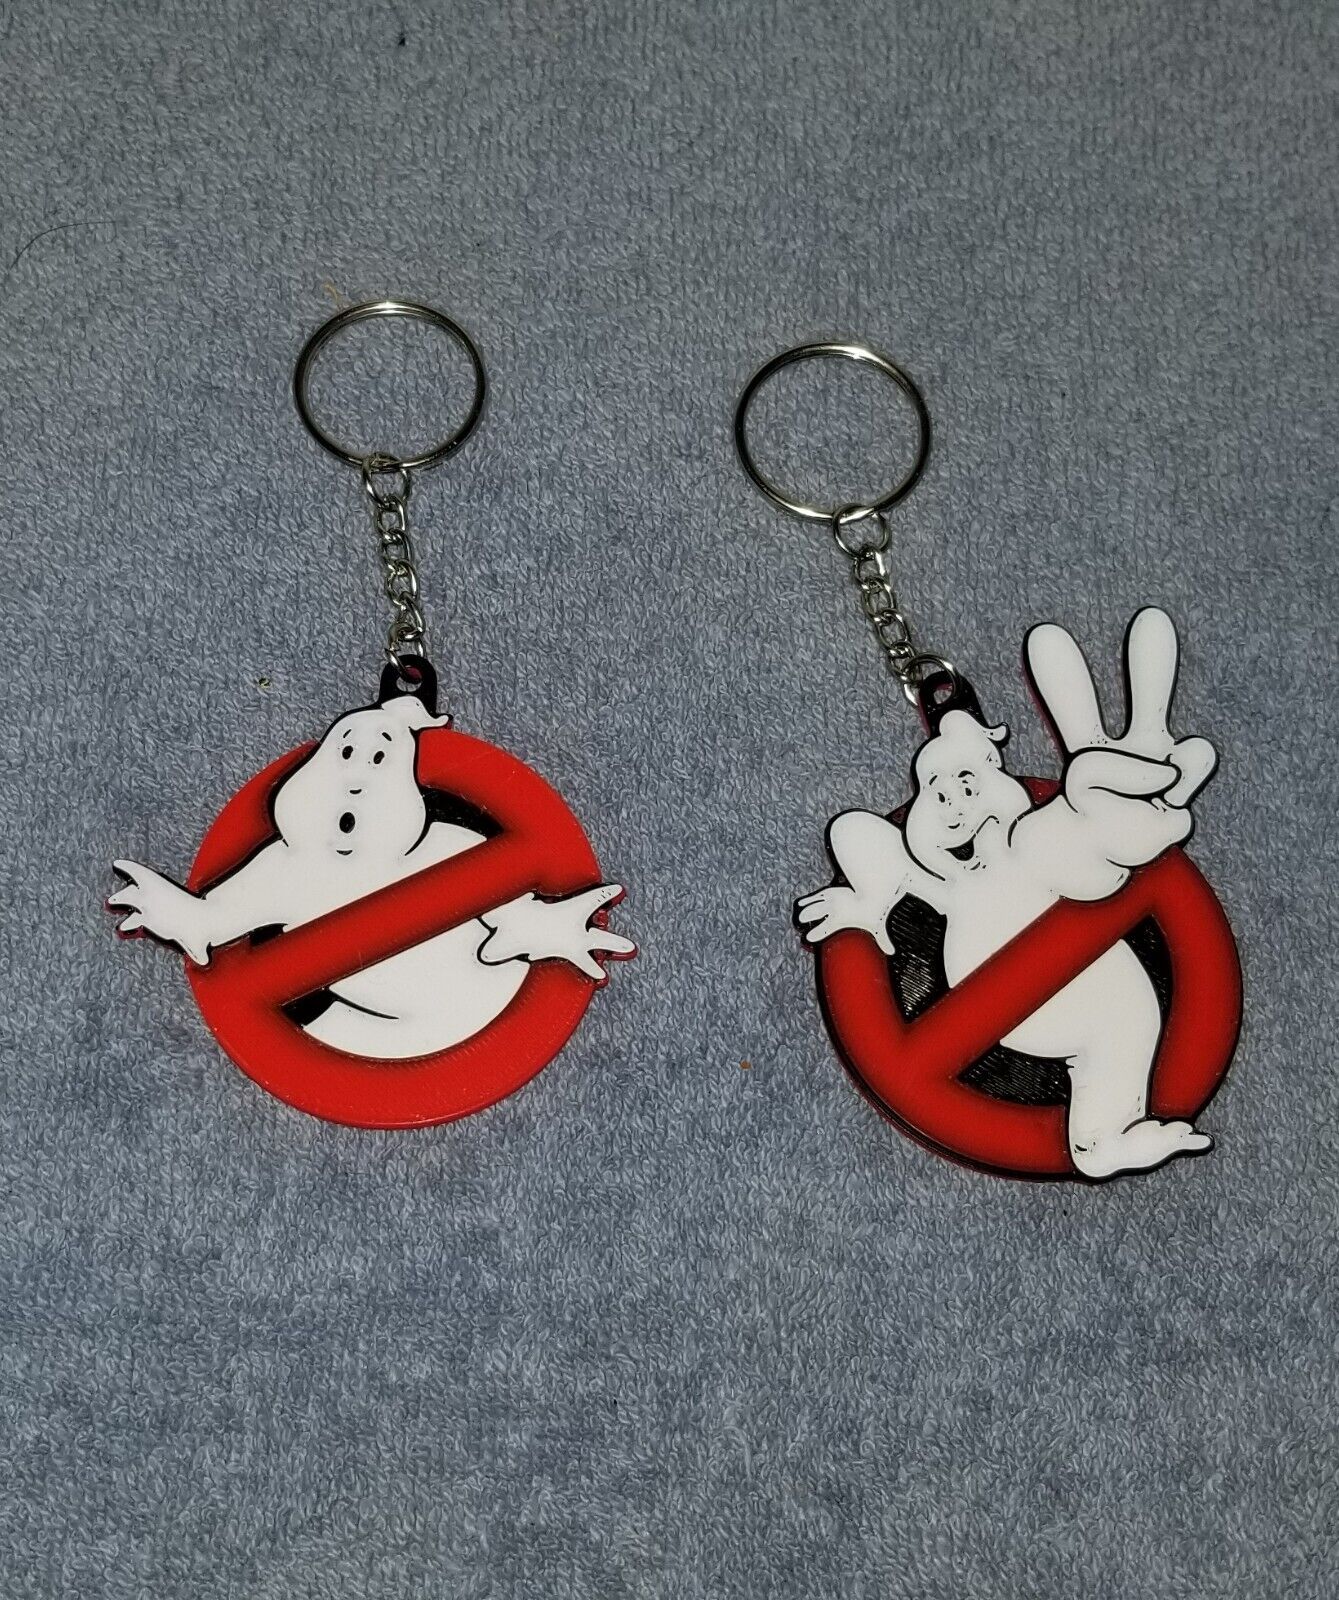 3D Printed GHOSTBUSTERS 1 & 2 Keychain Lot PLASTIC